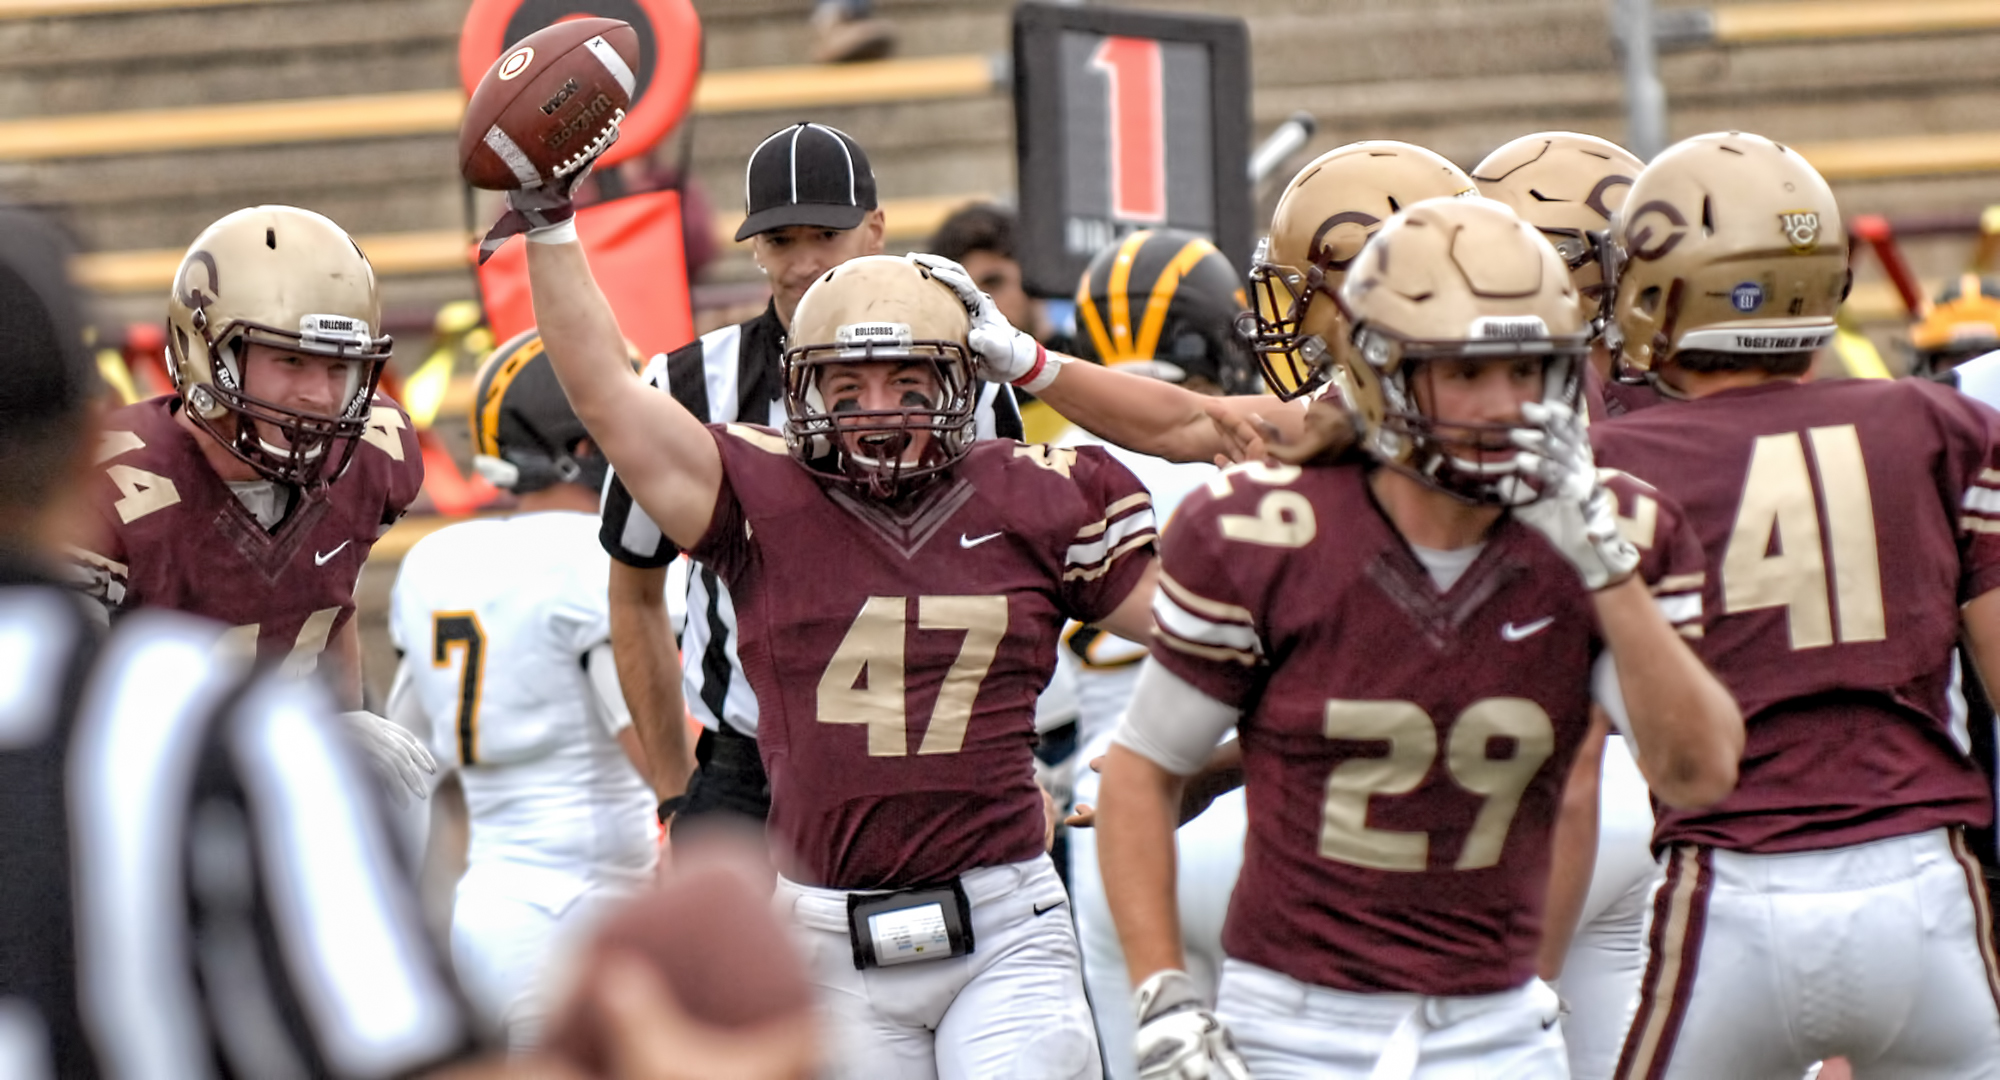 Sophomore Sam Michel is all smiles after recovering a fumble on a kickoff in the Cobbers' 27-17 win over Gustavus.